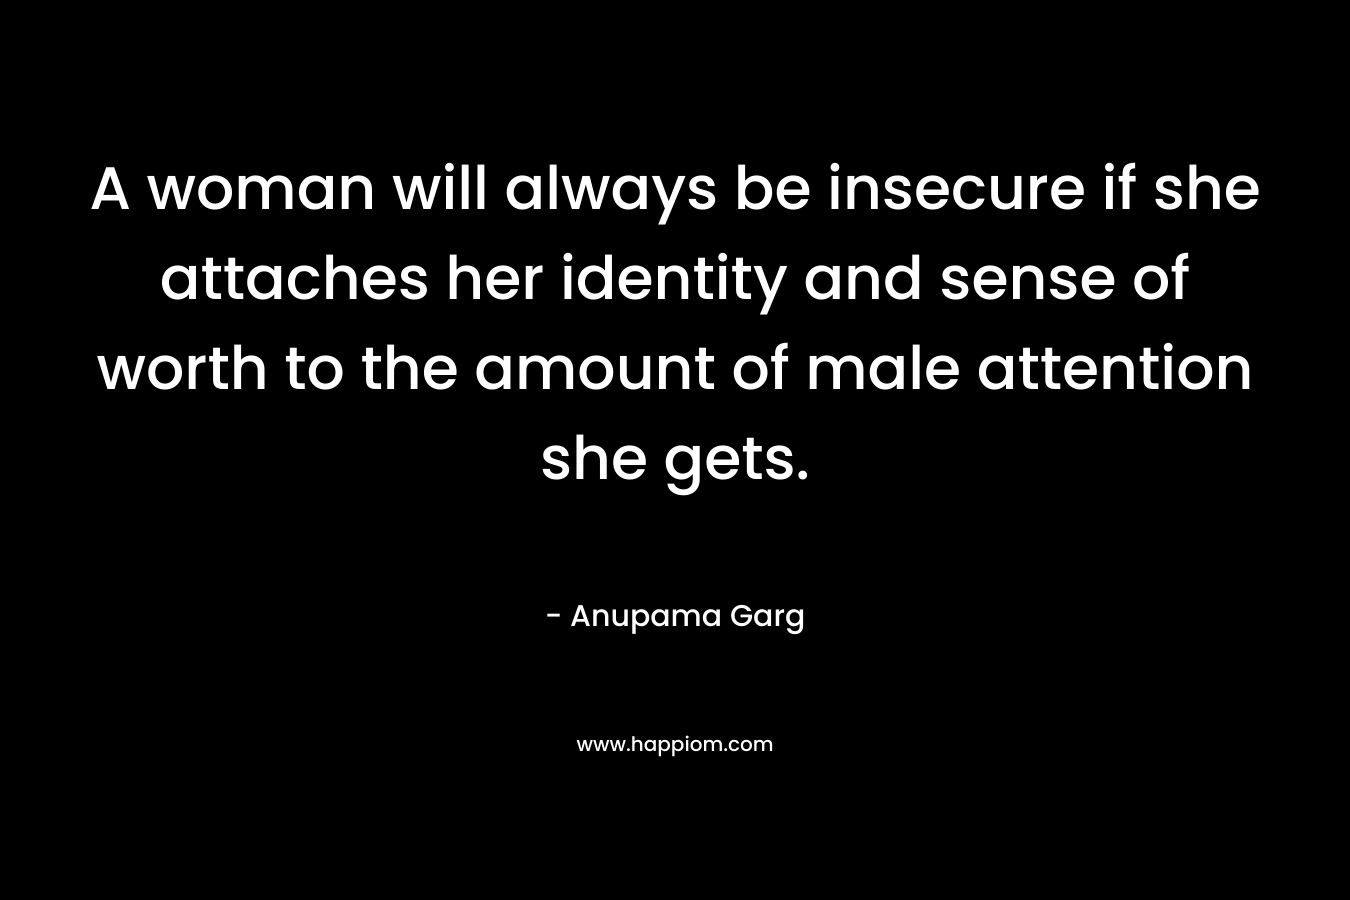 A woman will always be insecure if she attaches her identity and sense of worth to the amount of male attention she gets. – Anupama Garg